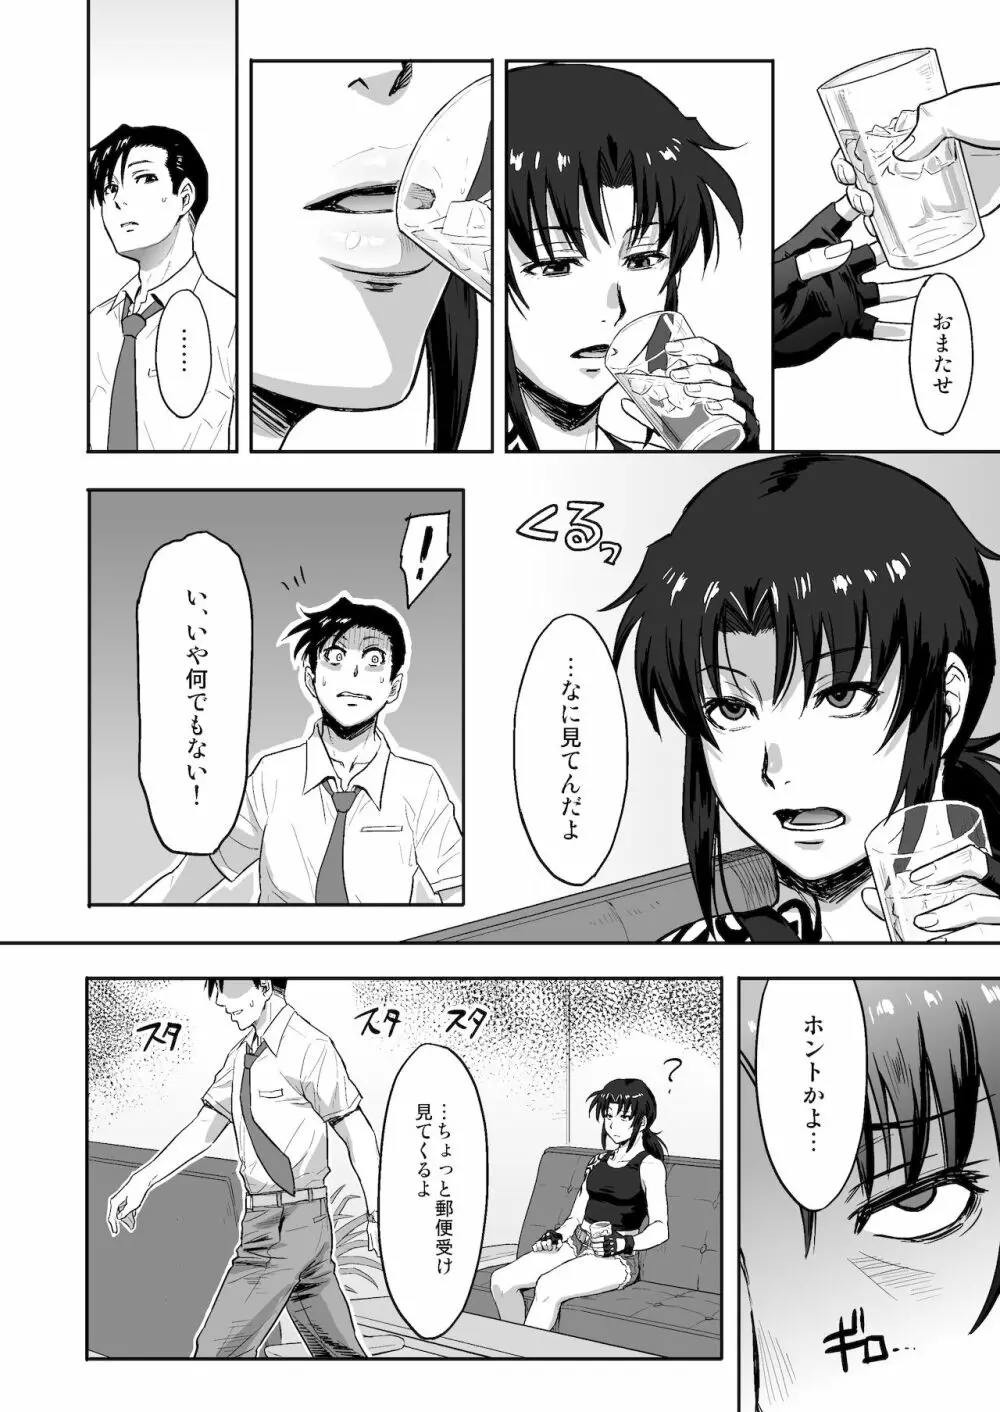 SLEEPING Revy - page3